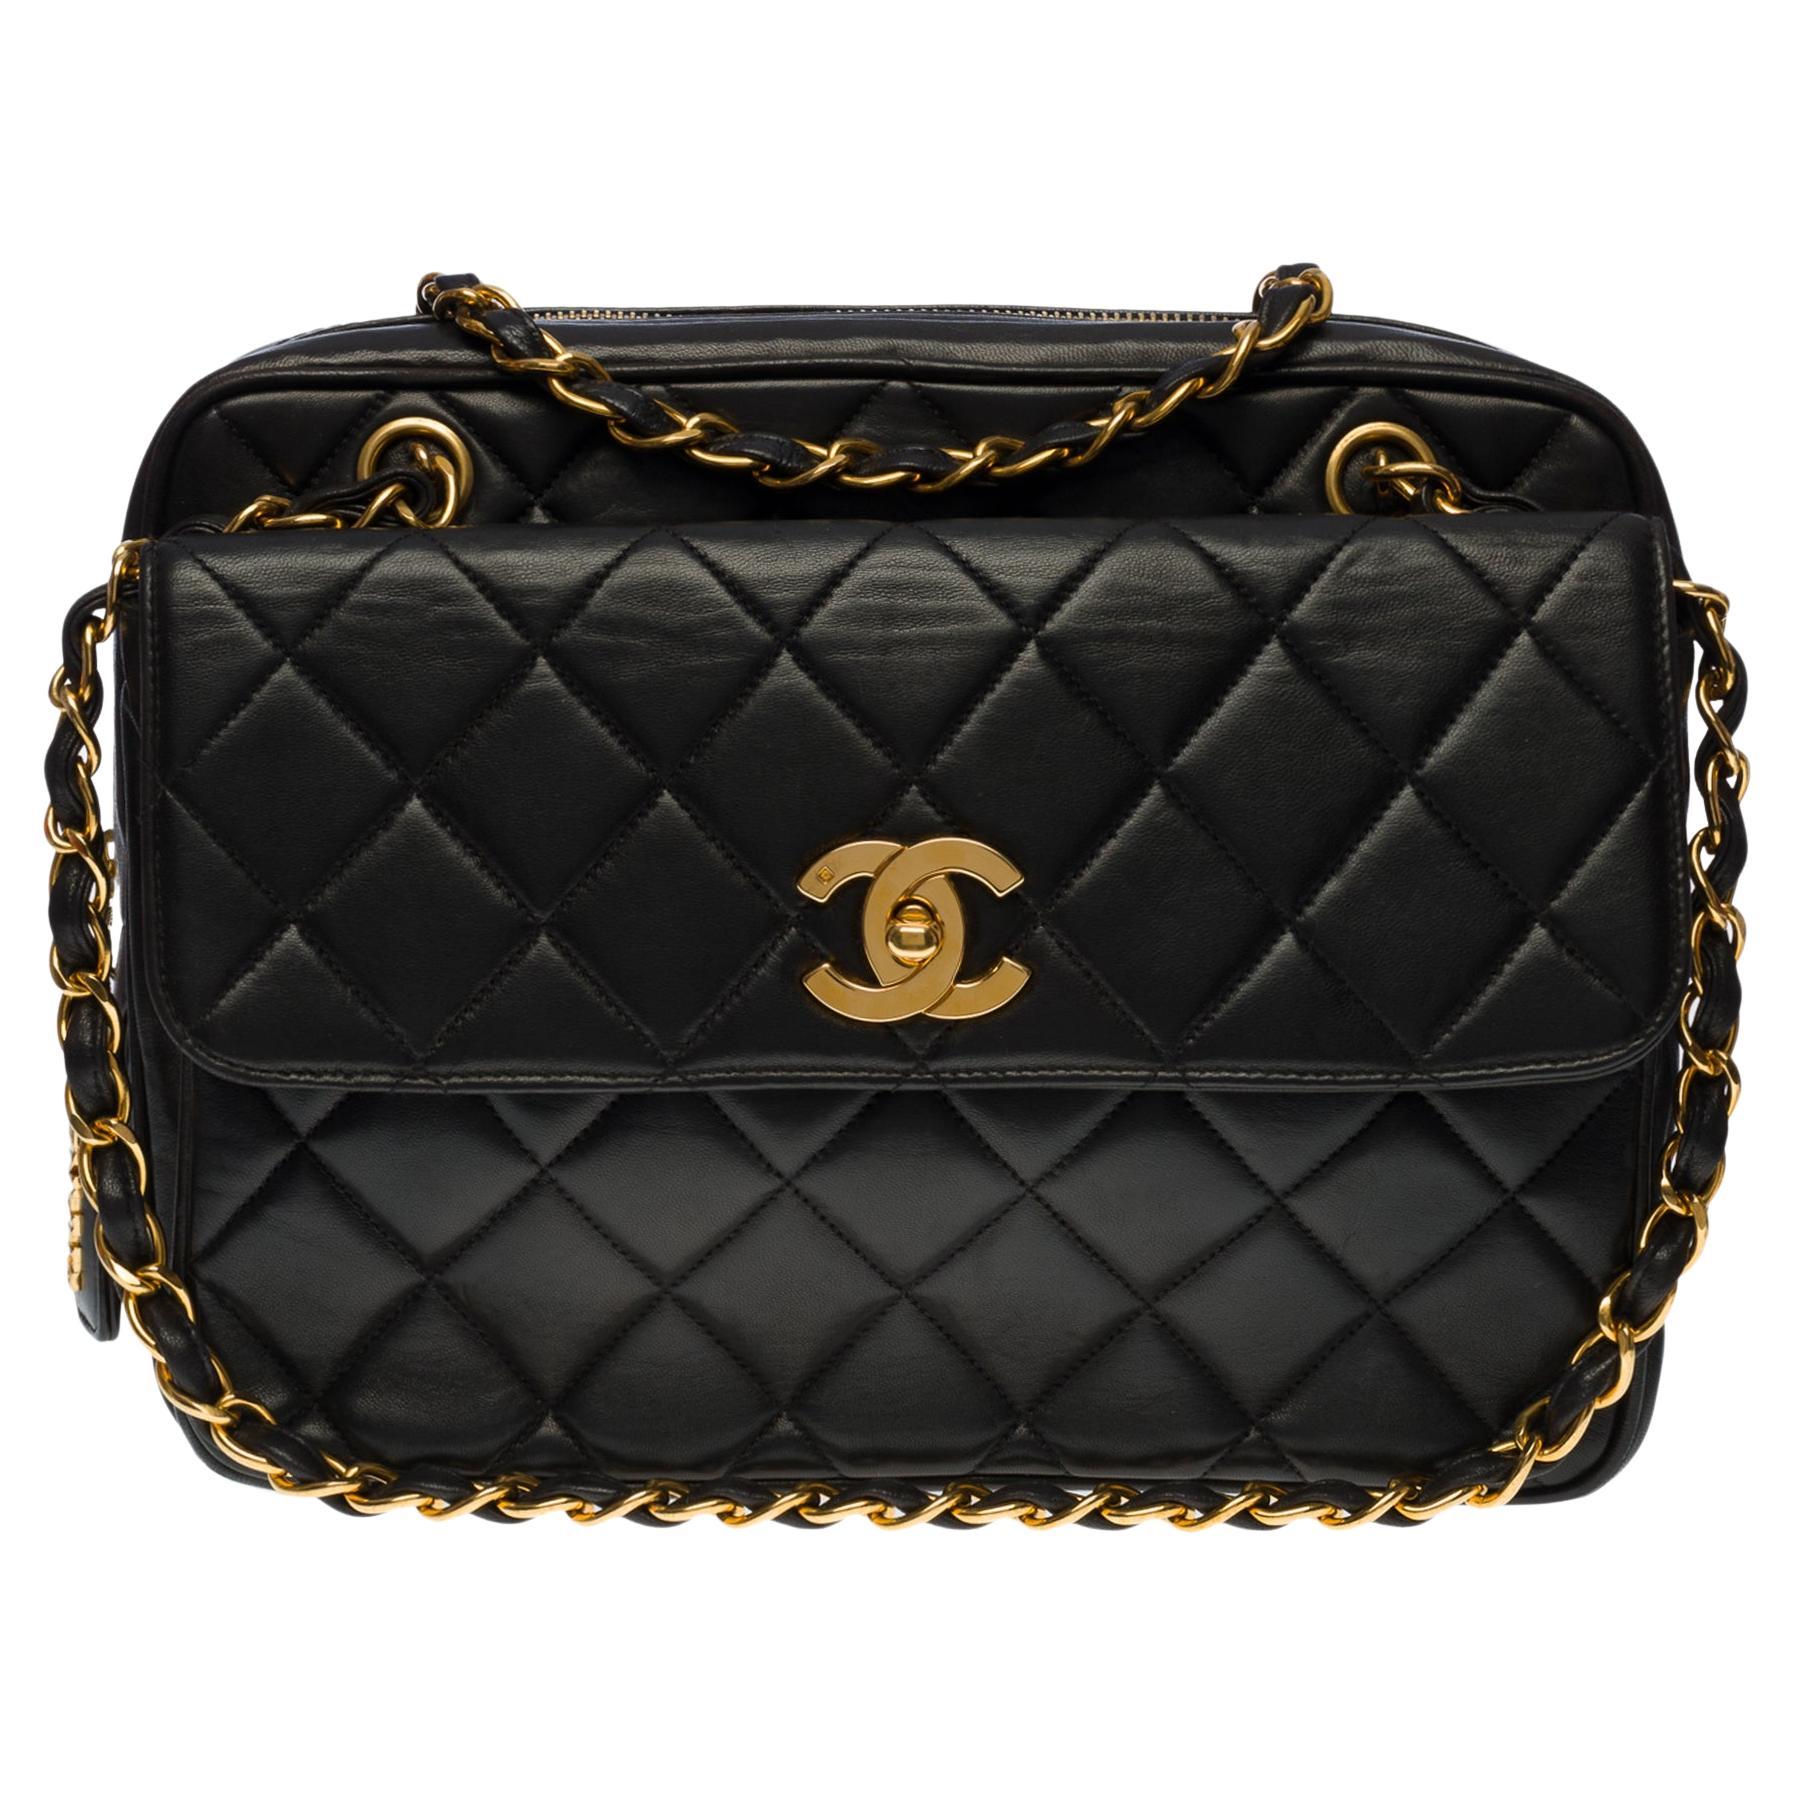 Chanel Camera GM shoulder flap bag in black quilted lambskin leather, GHW